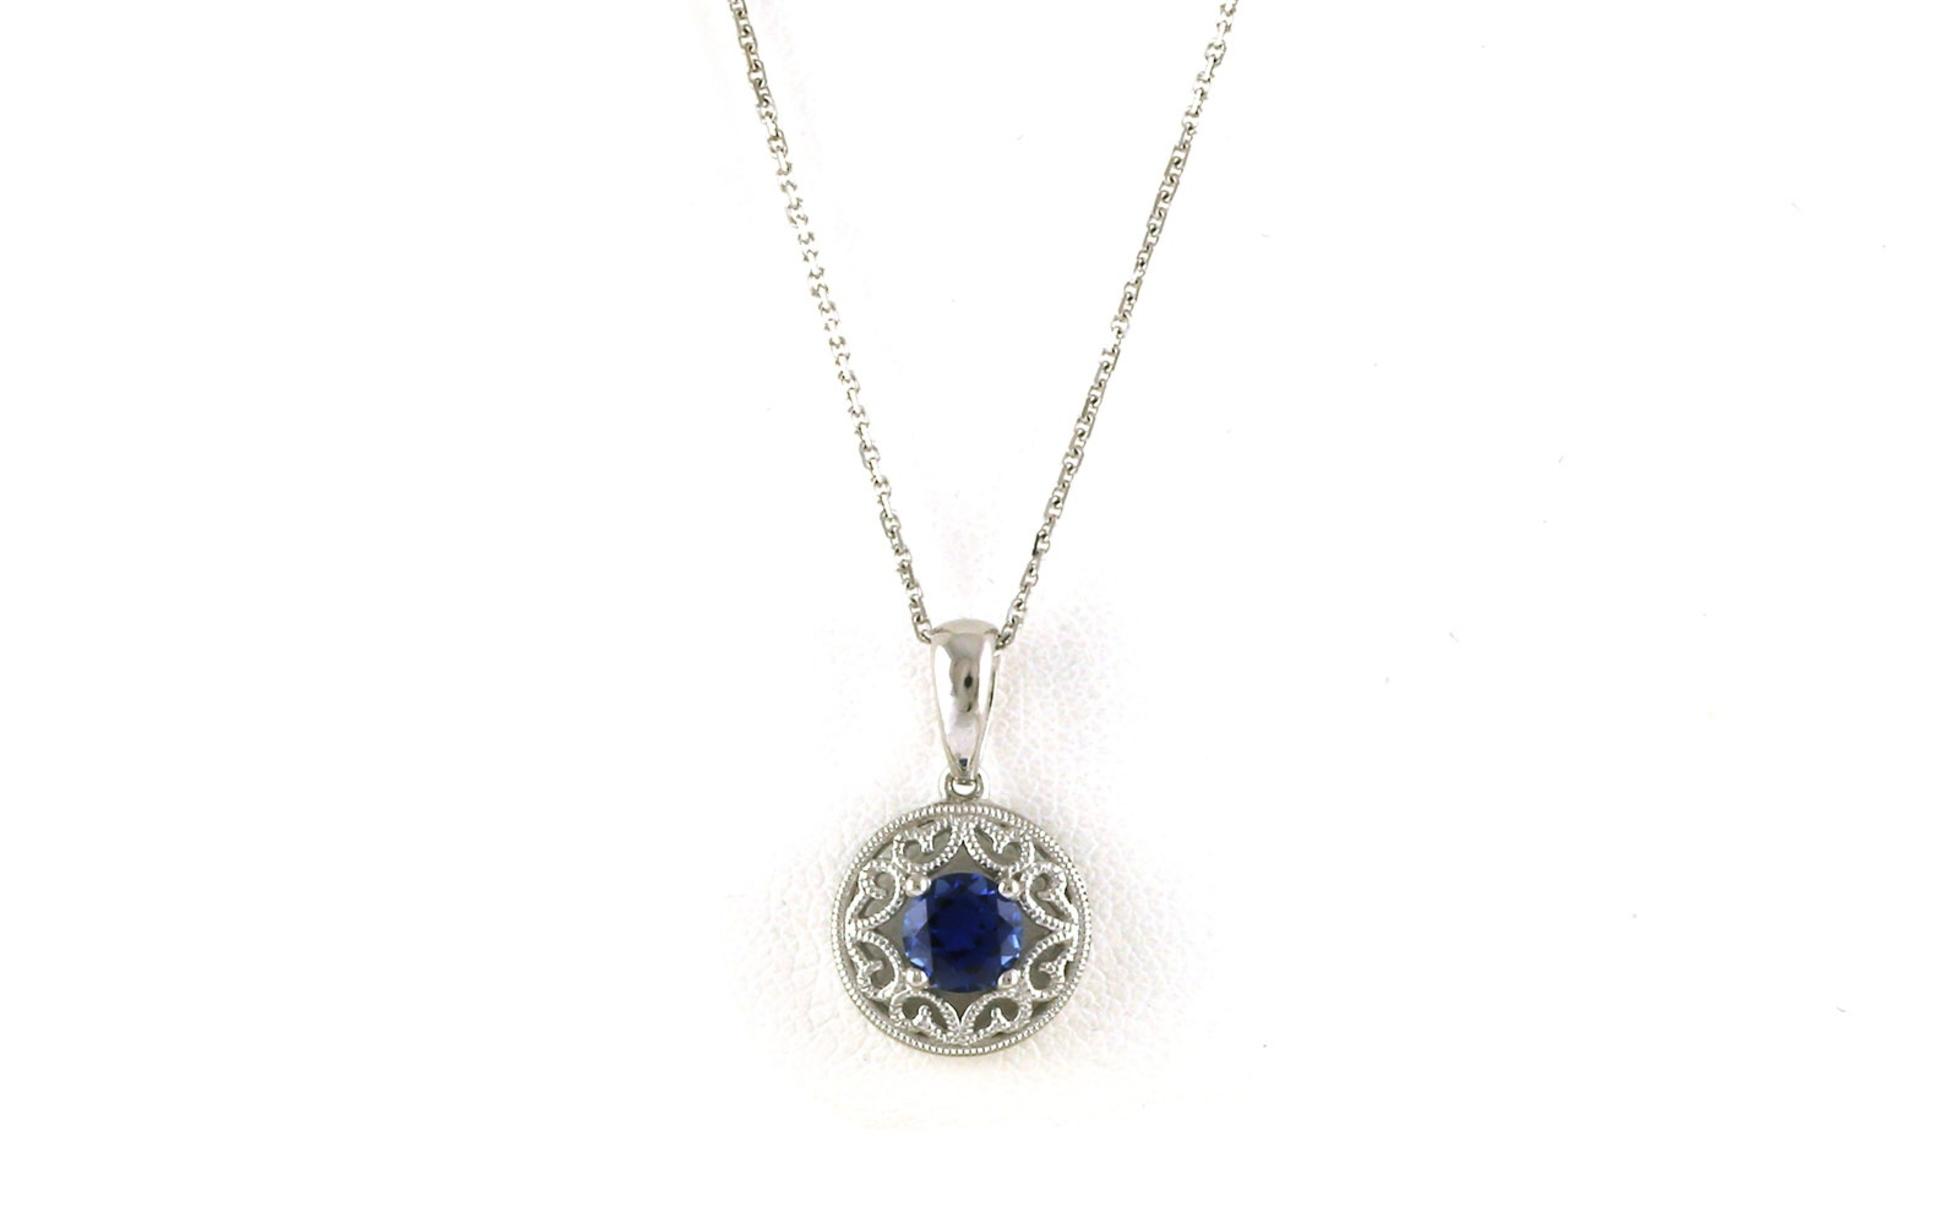 Filigree Halo Montana Yogo Sapphire Necklace with milgrain Detail in White Gold (0.56cts TWT)